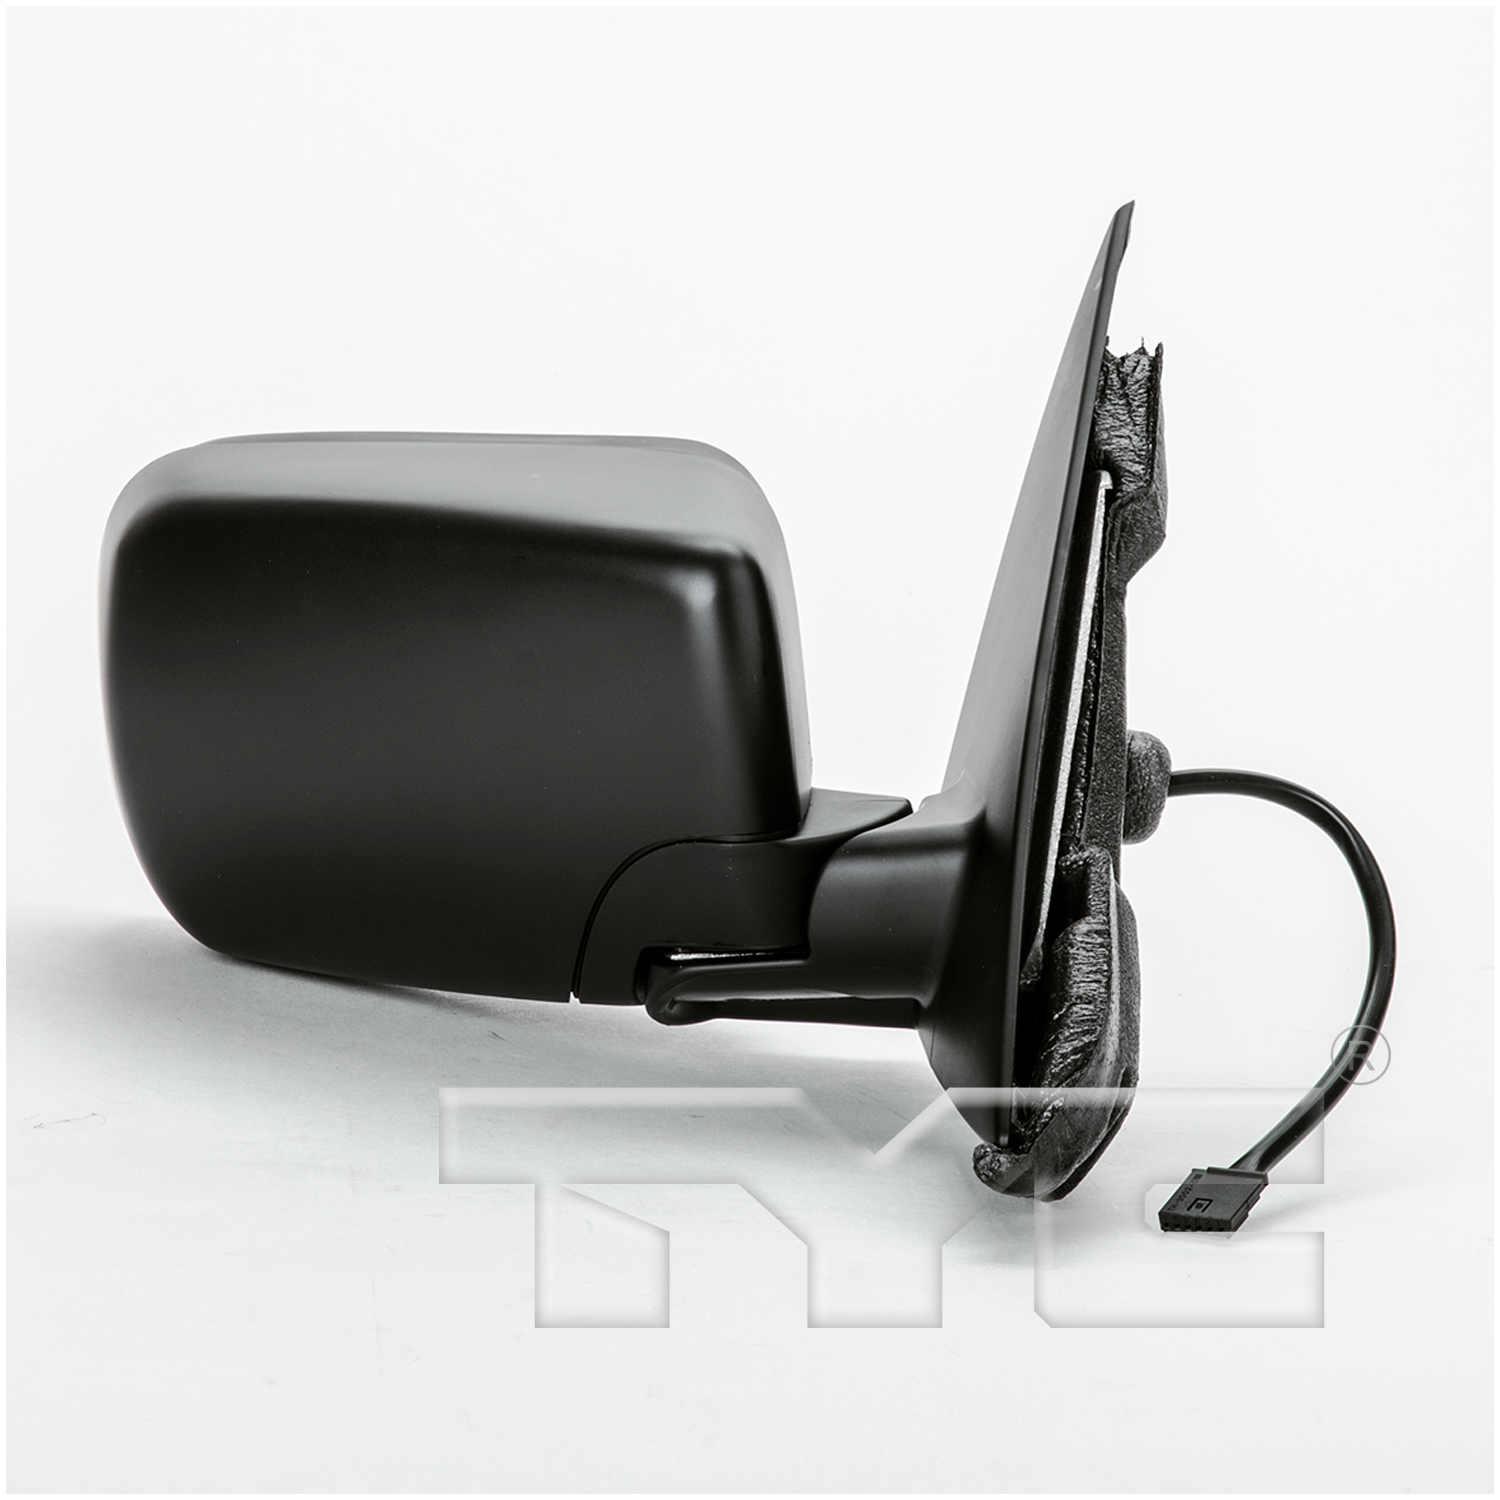 Aftermarket MIRRORS for BMW - M3, M3,00-04,RT Mirror outside rear view